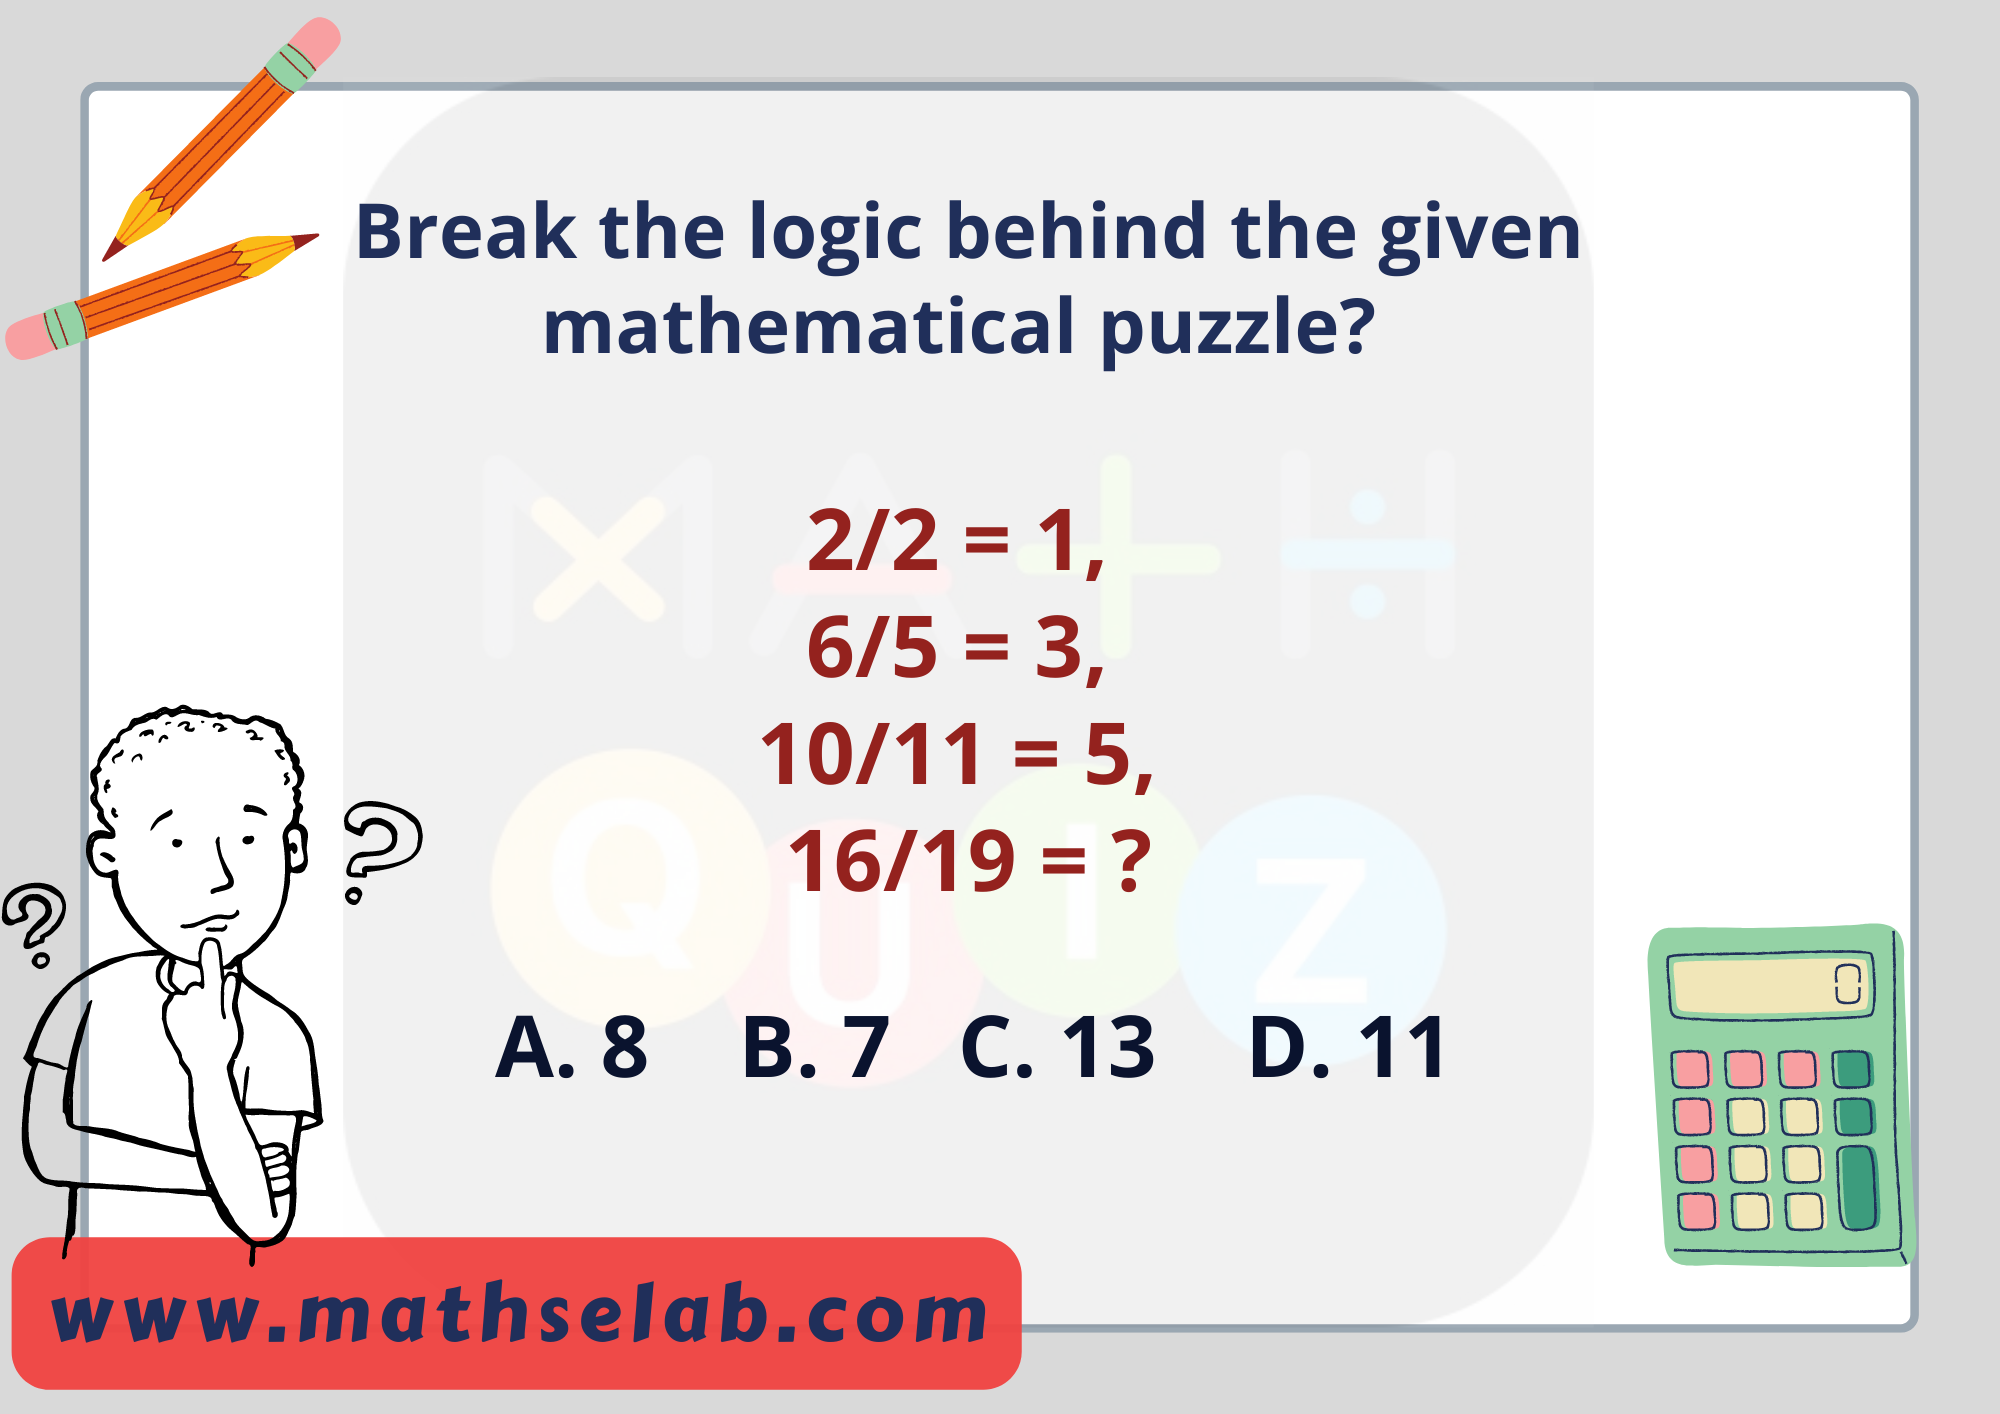 Break the logic behind the given mathematical puzzle? 2/2 = 1, 6/5 = 3, 10/11 = 5, 16/19 = ?